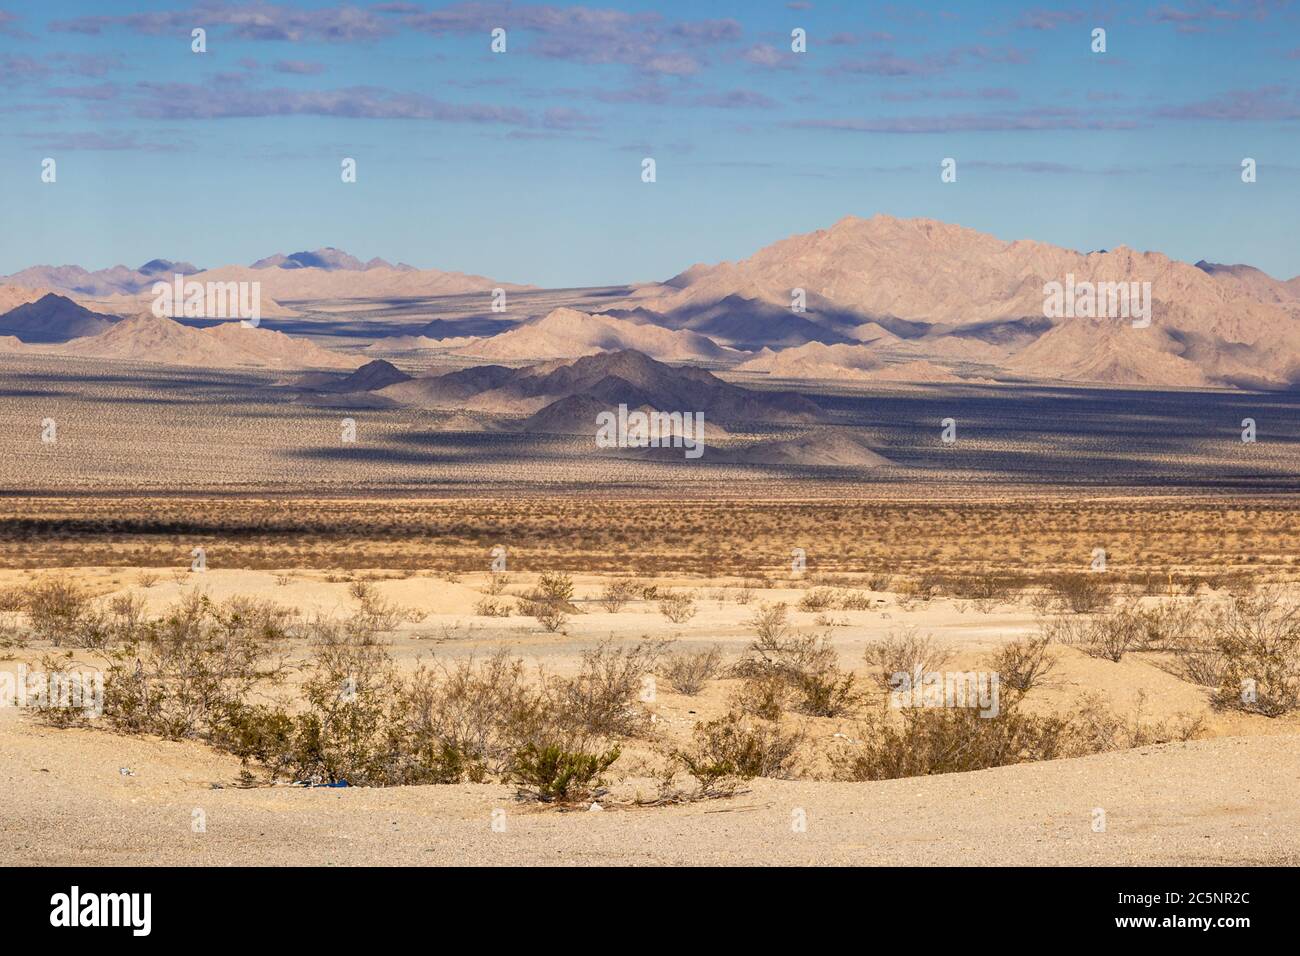 A Californian desert landscape with cloud shadows on the mountains Stock Photo